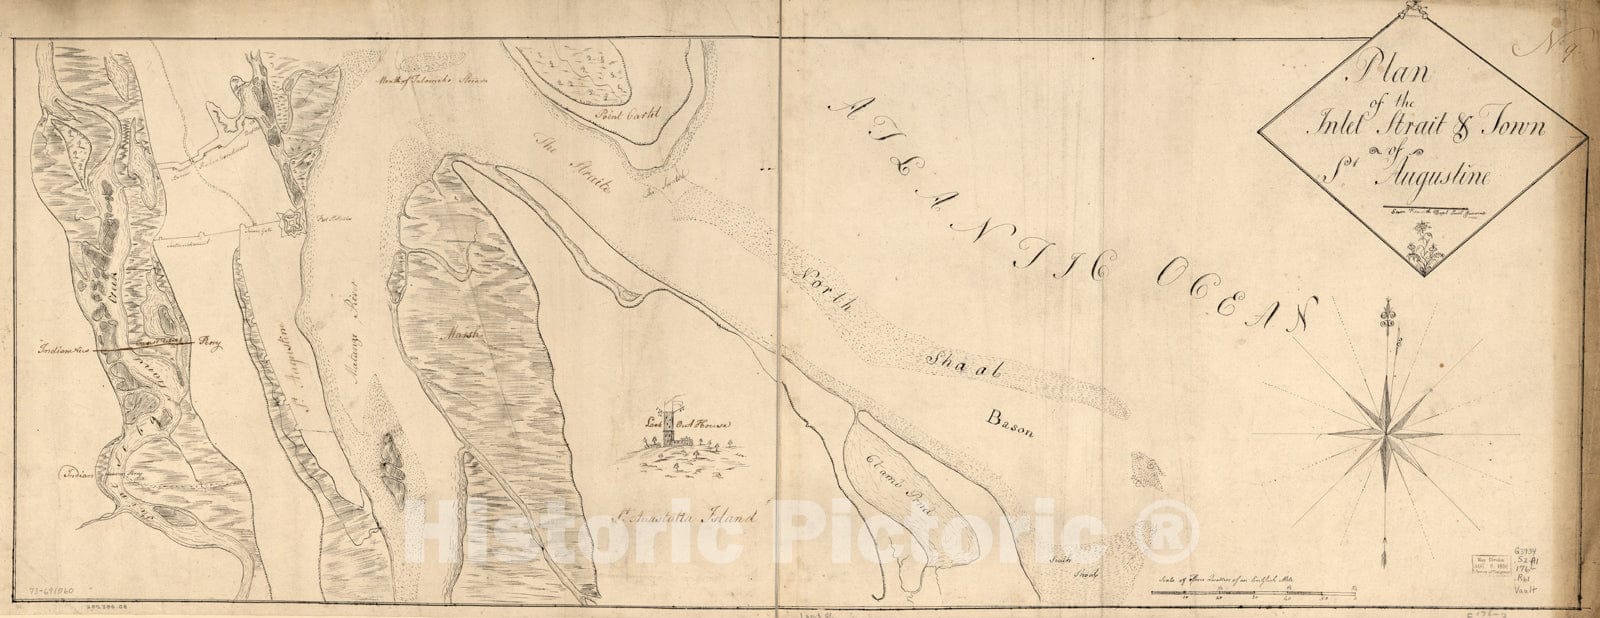 Historical Map, 1760-1769 Plan of The Inlet, Strait, Town of St. Augustine, Vintage Wall Art